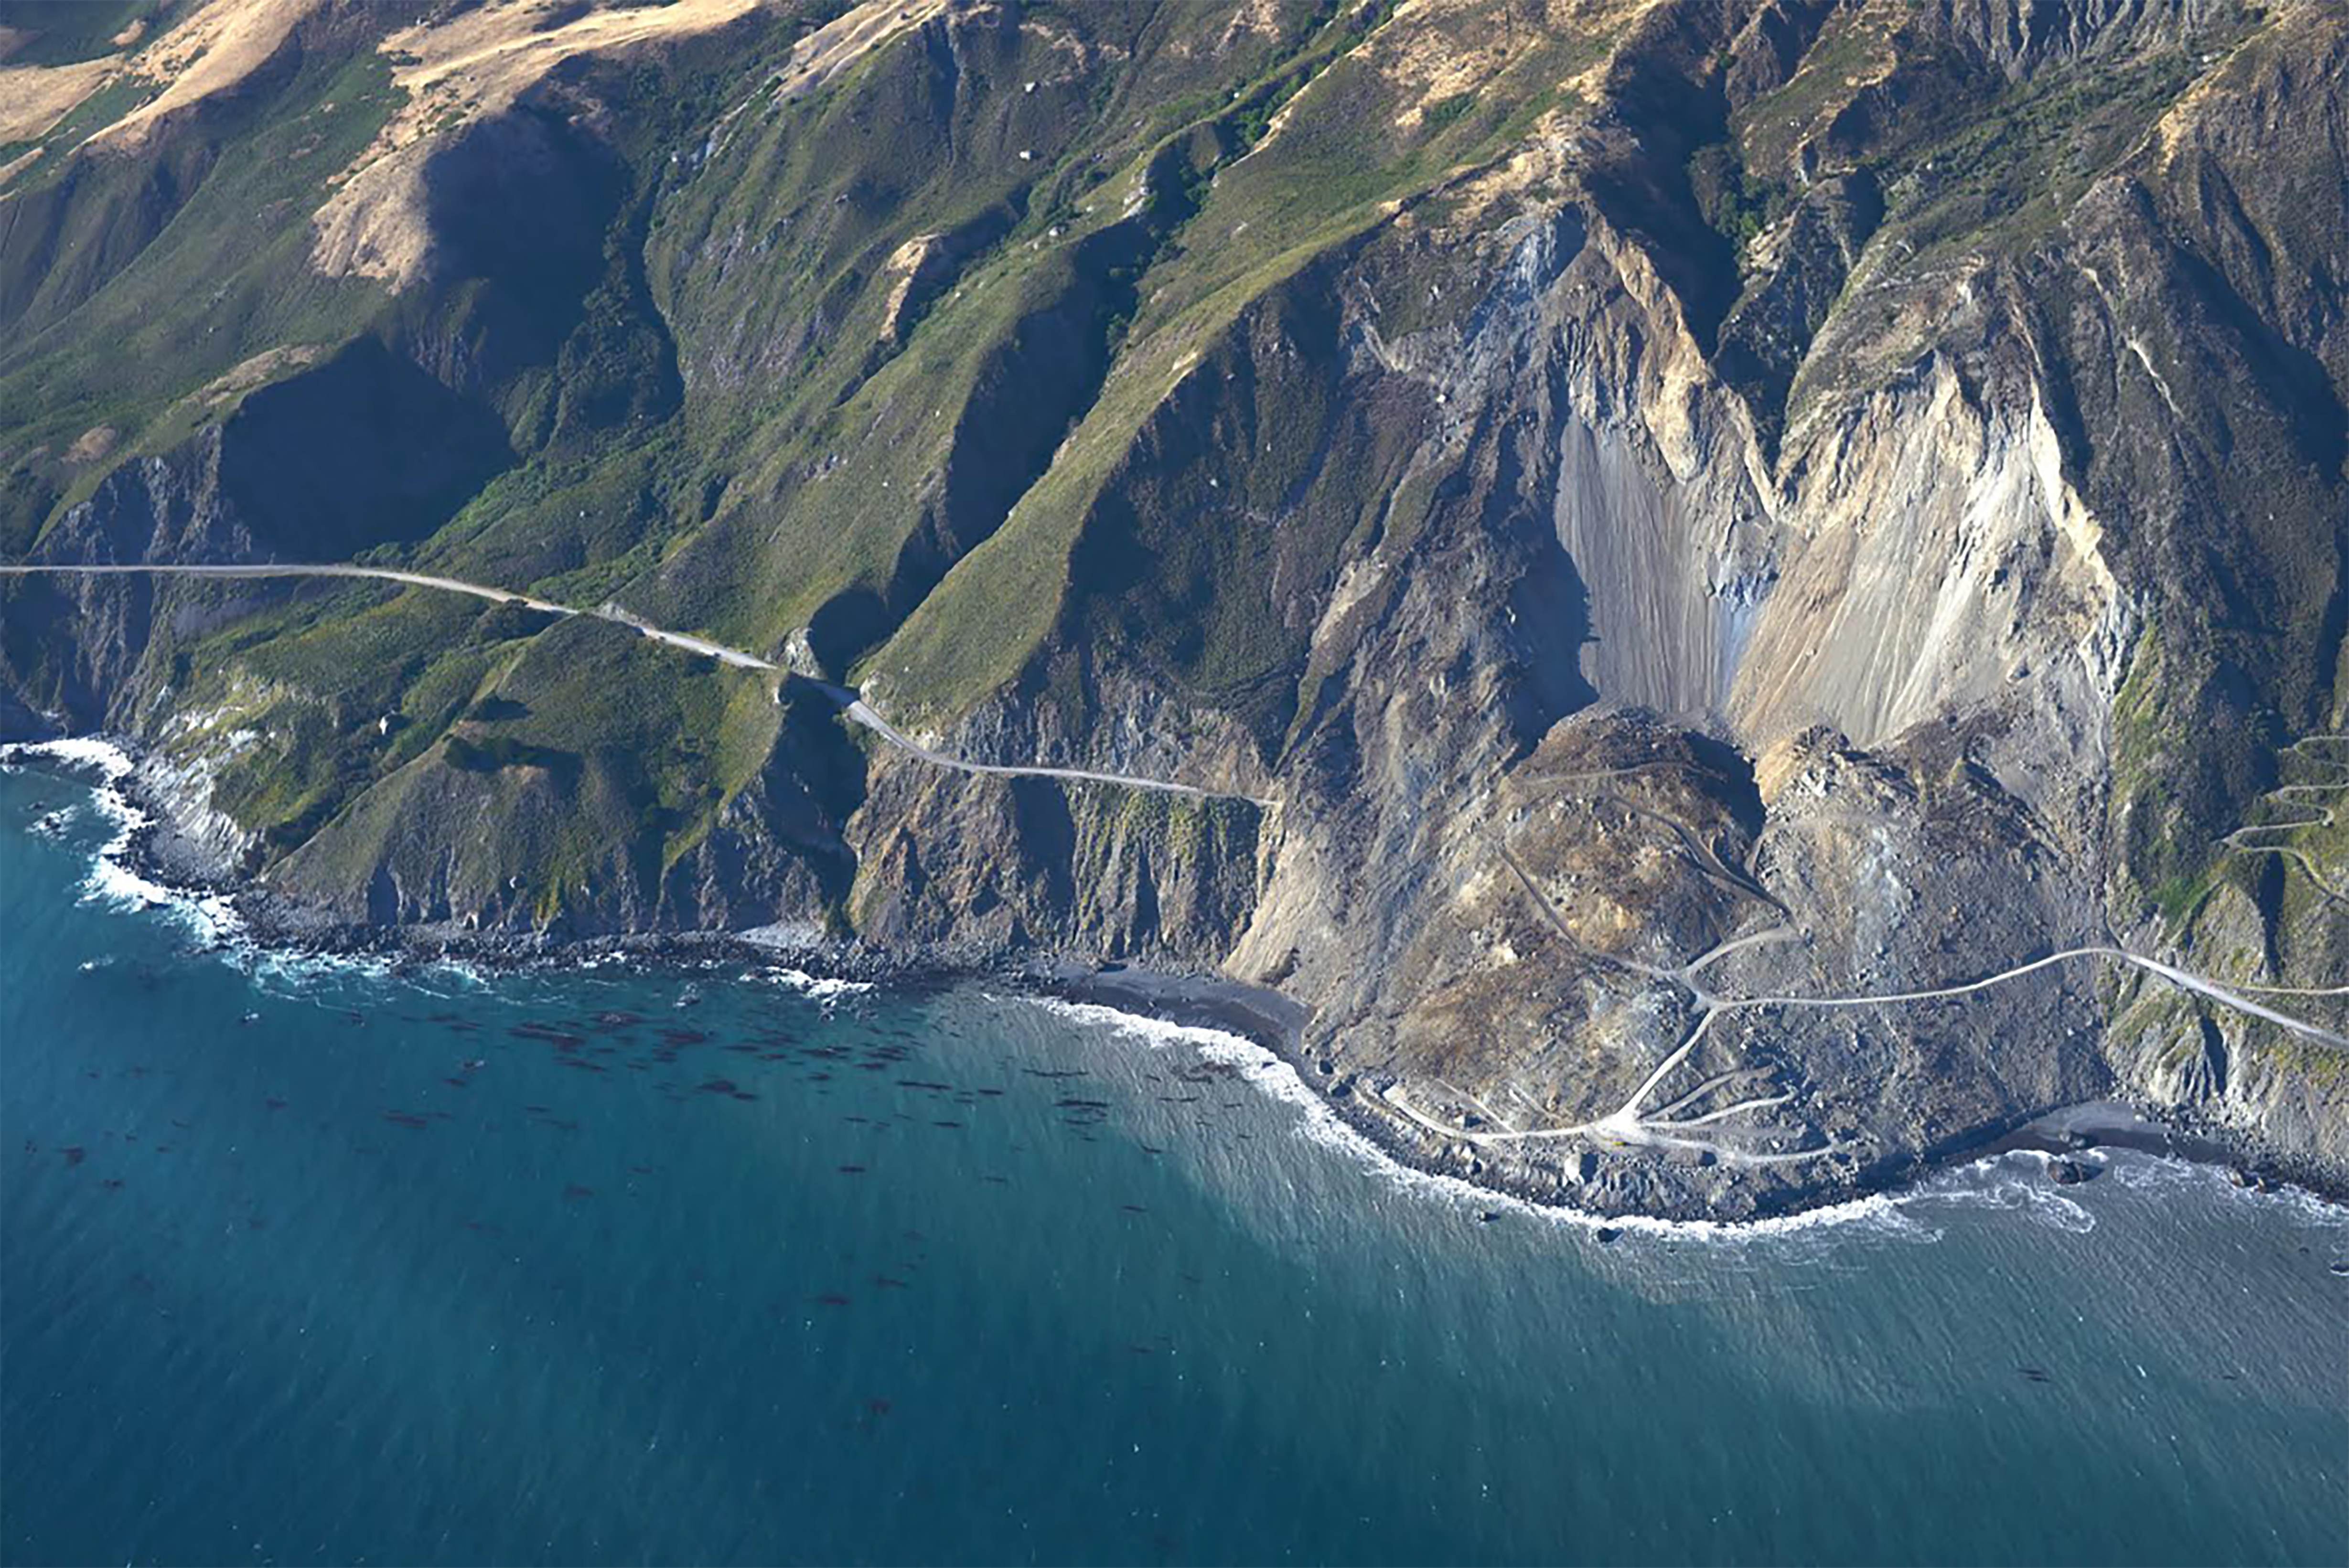 A major landslide in Big Sur, California in 2017 covered a quarter-mile of Highway 1. It was not the only landslide to limit access to the highway in 2017, and repair estimates exceed $40 million.